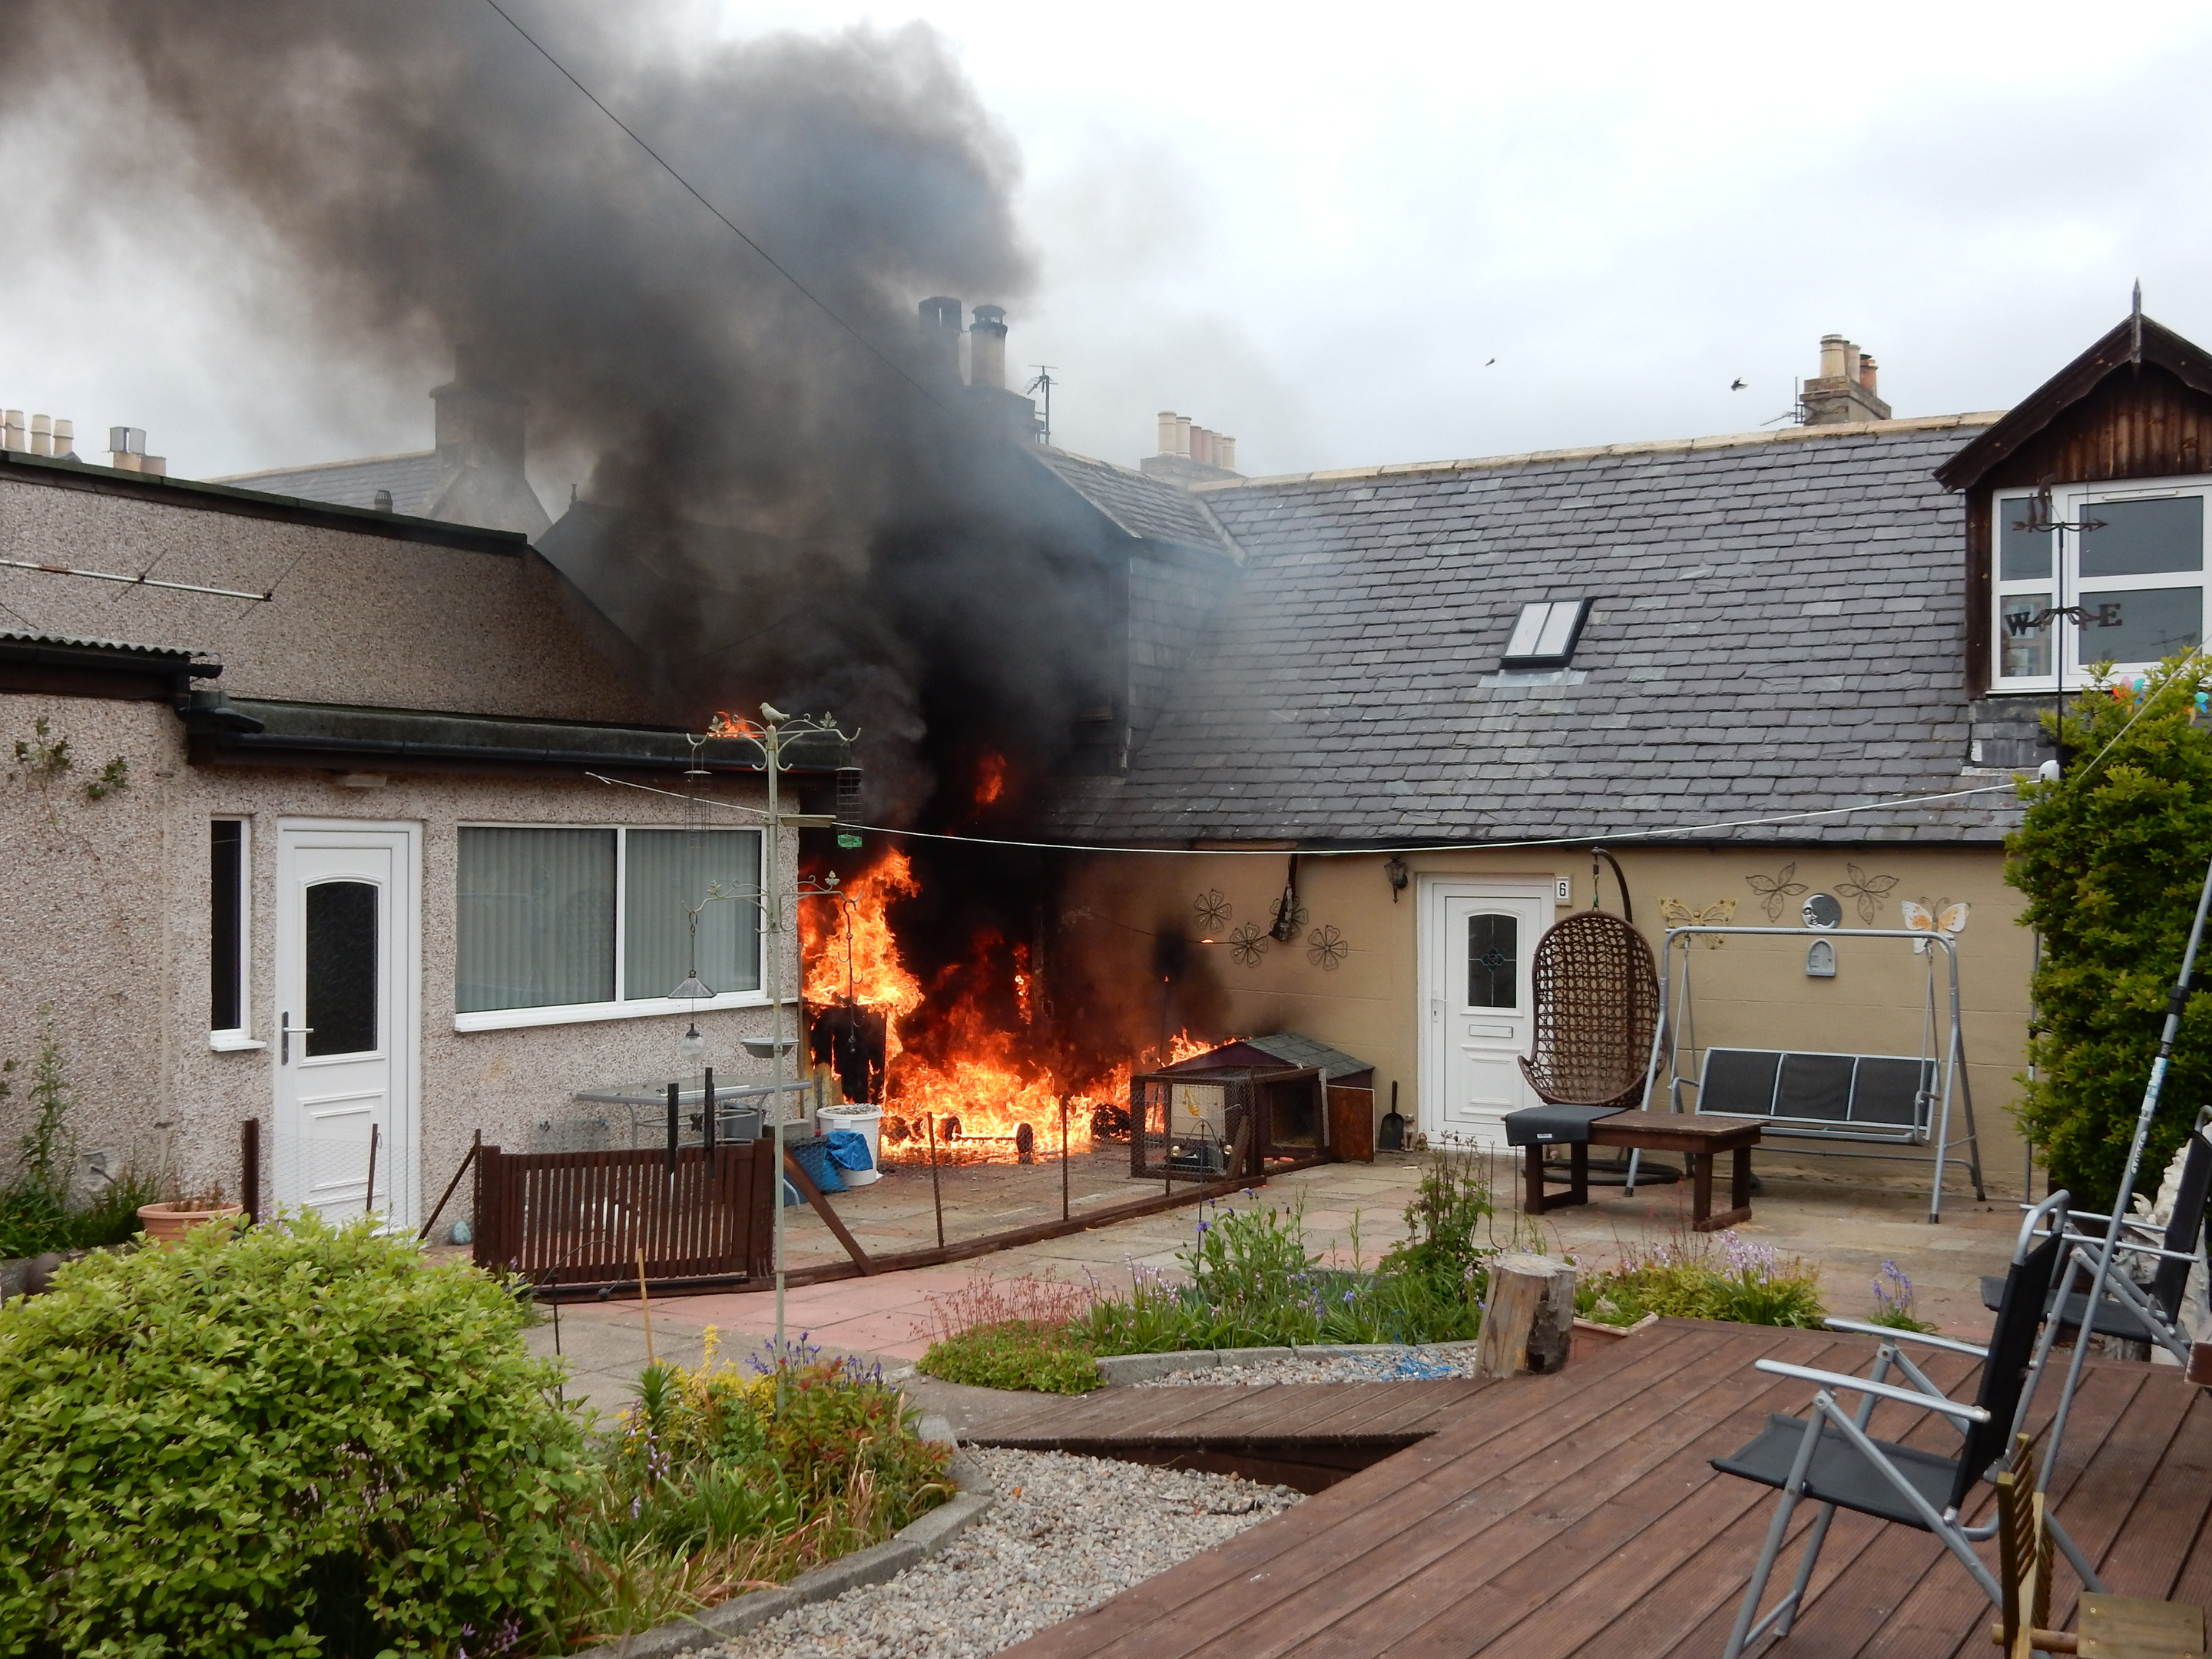 The fire spread through a semi-detached house in Nairn